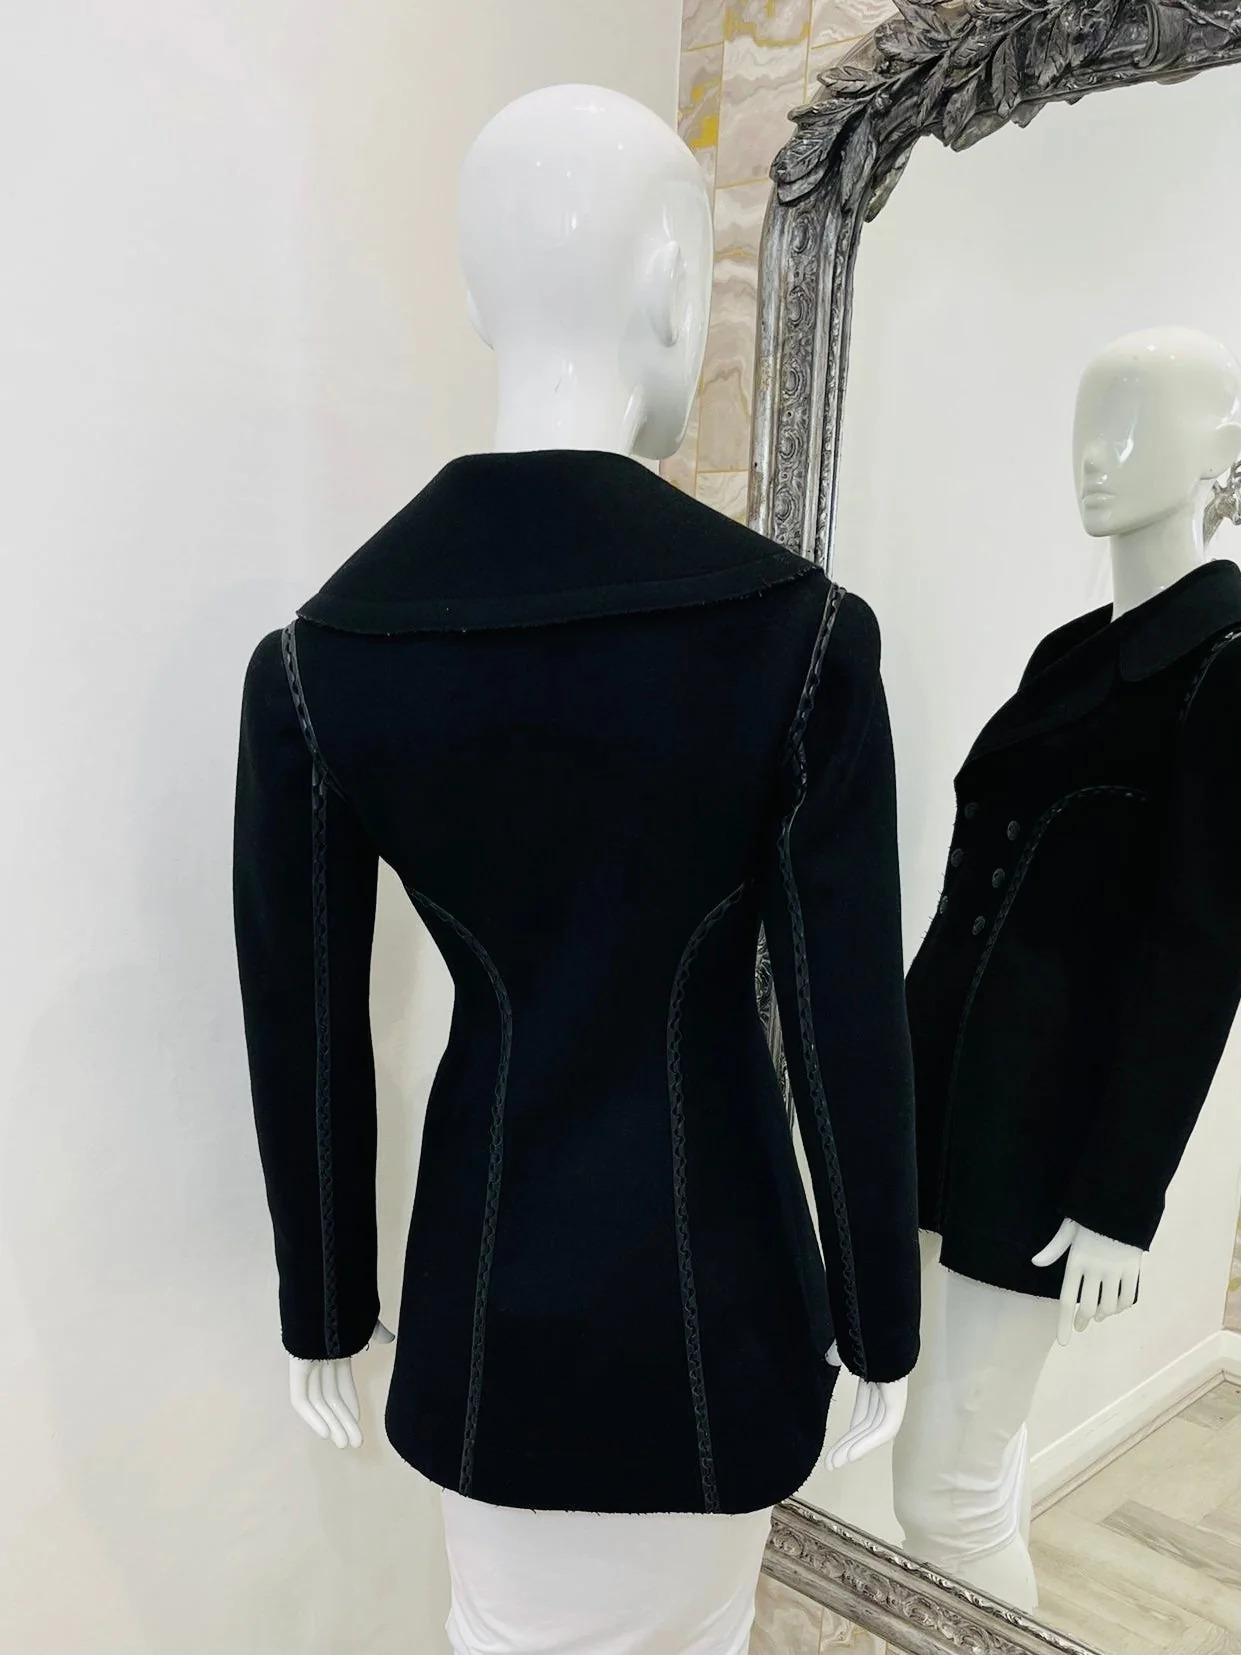 Alaia Wool Coat With Leather Trim In Excellent Condition For Sale In London, GB